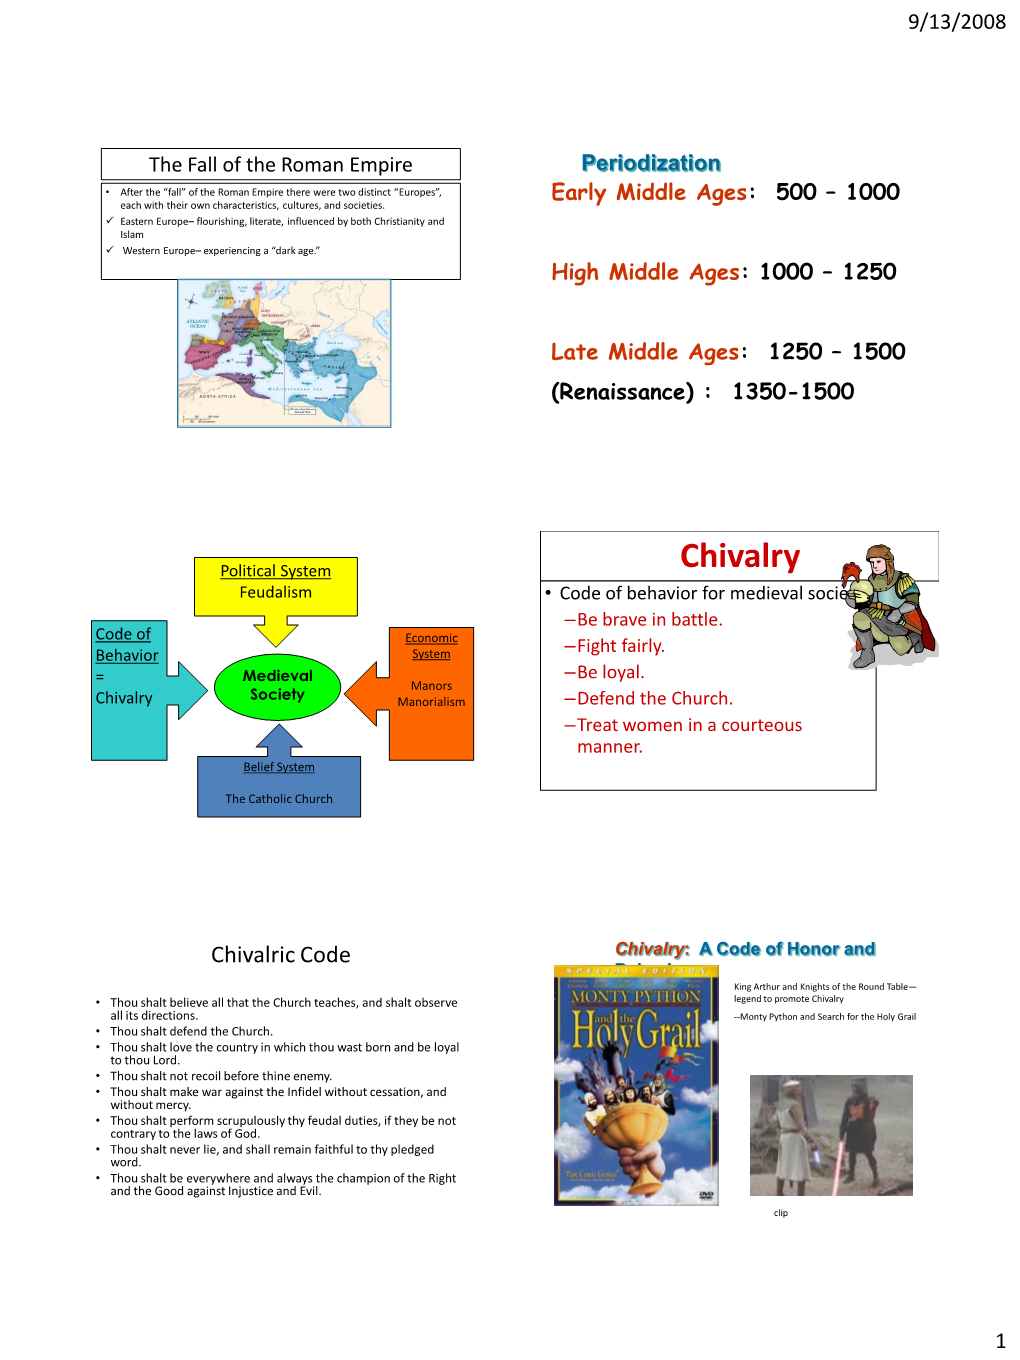 Chivalry Feudalism • Code of Behavior for Medieval Society